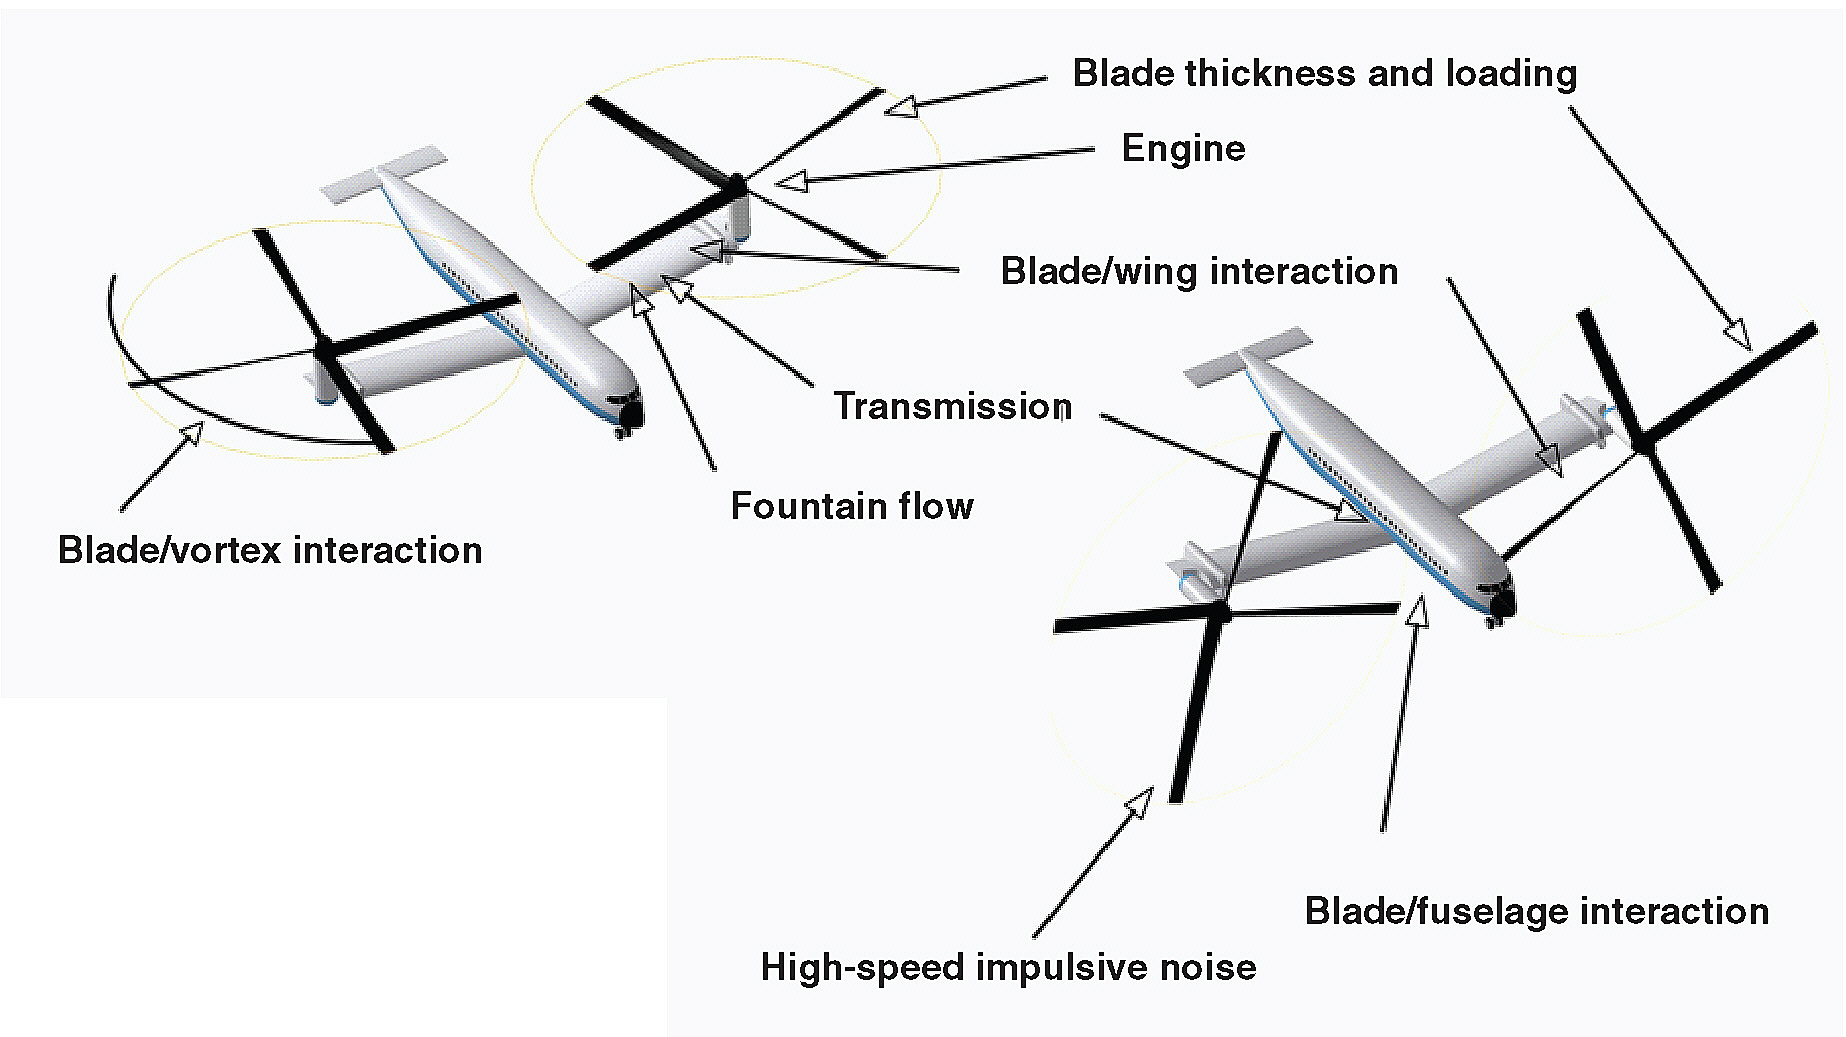 FIGURE 5-2 Breakdown of typical noise sources for a rotorcraft configuration. Source: Burley (2008).